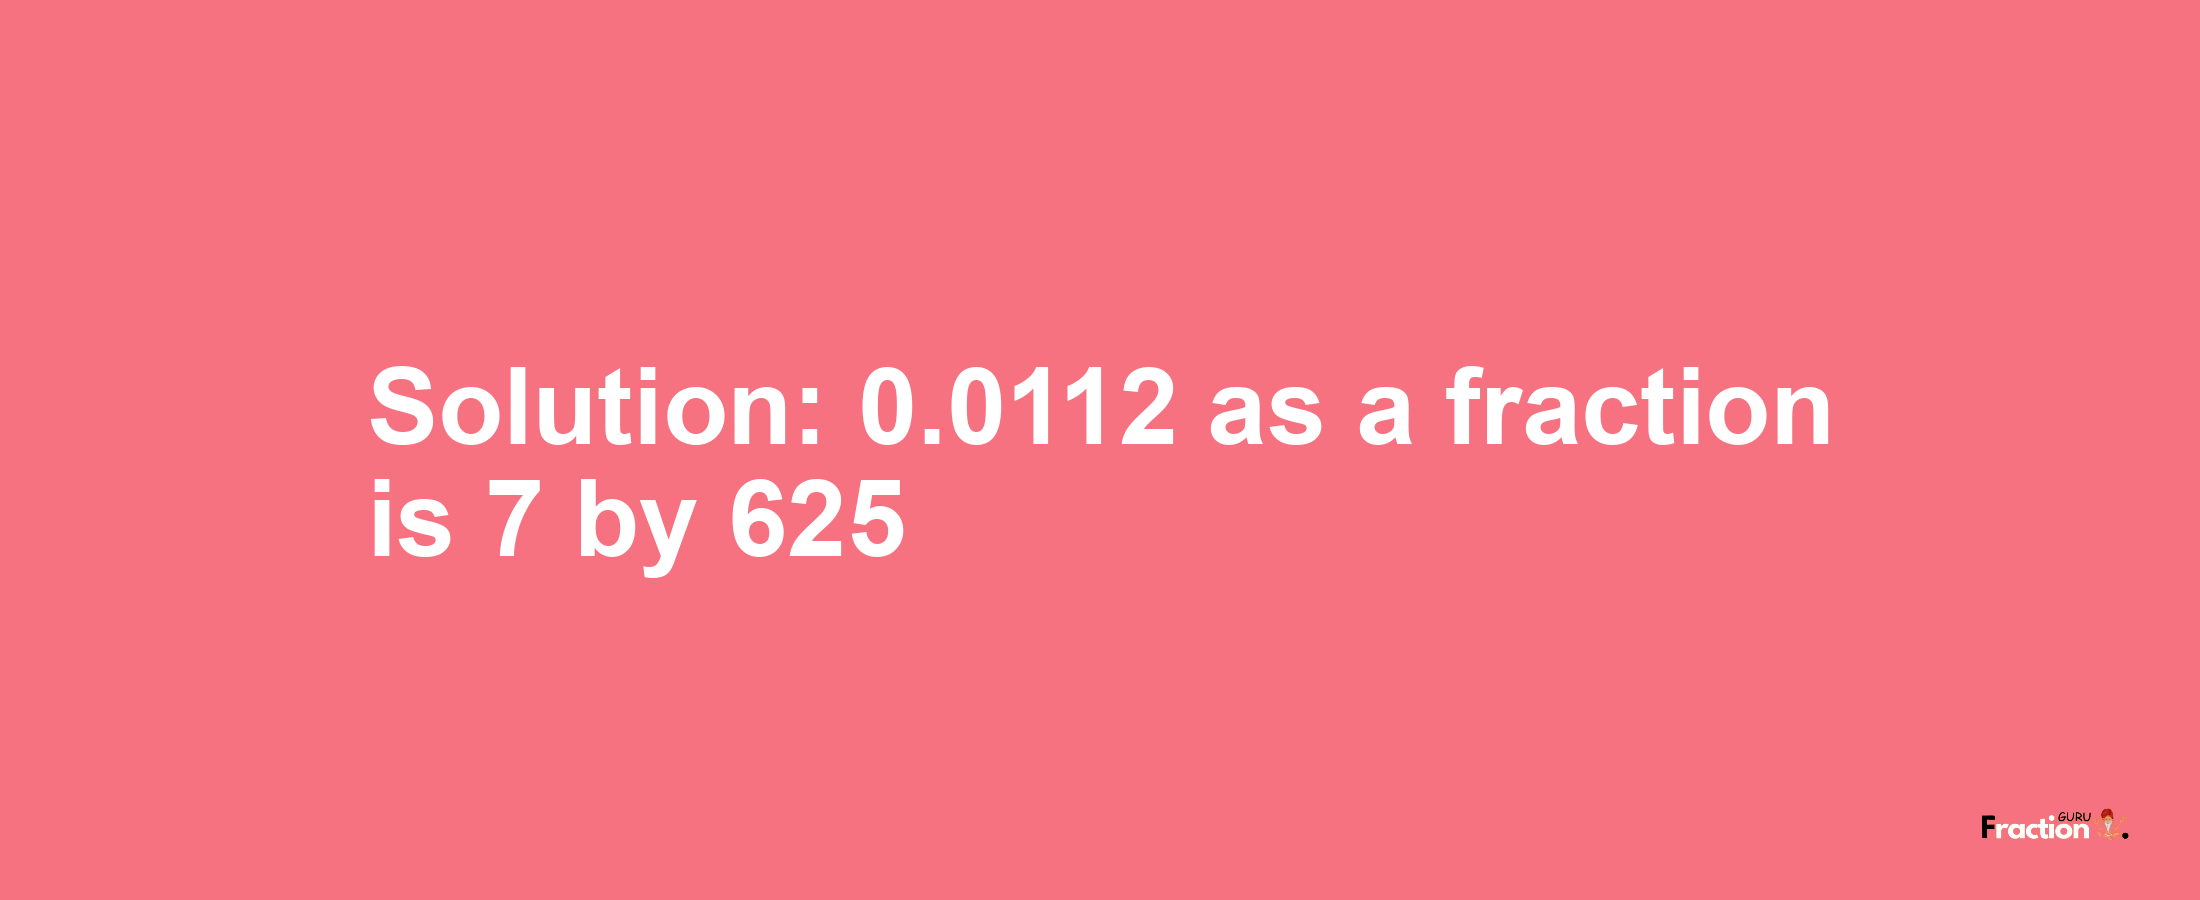 Solution:0.0112 as a fraction is 7/625